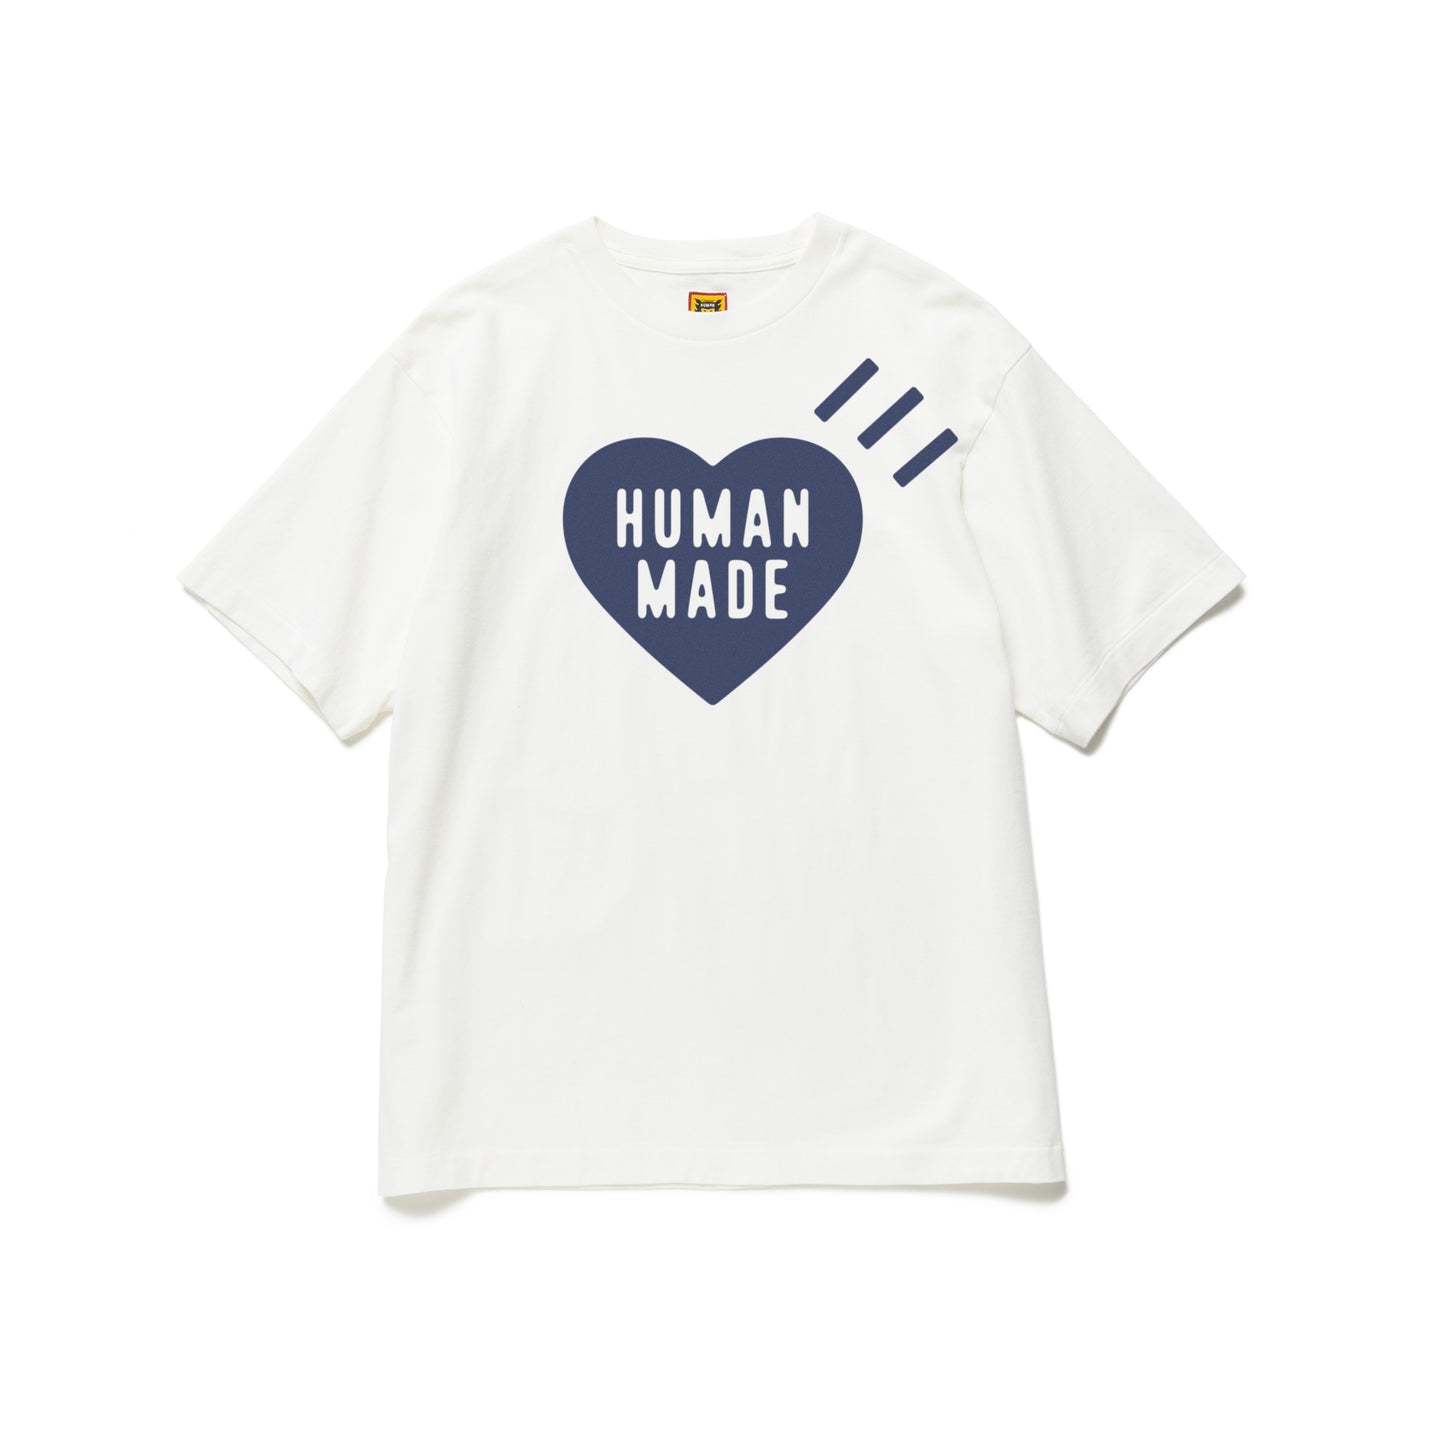 HUMANMADE Wasted Youth T-SHIRT#4 White SVerdy